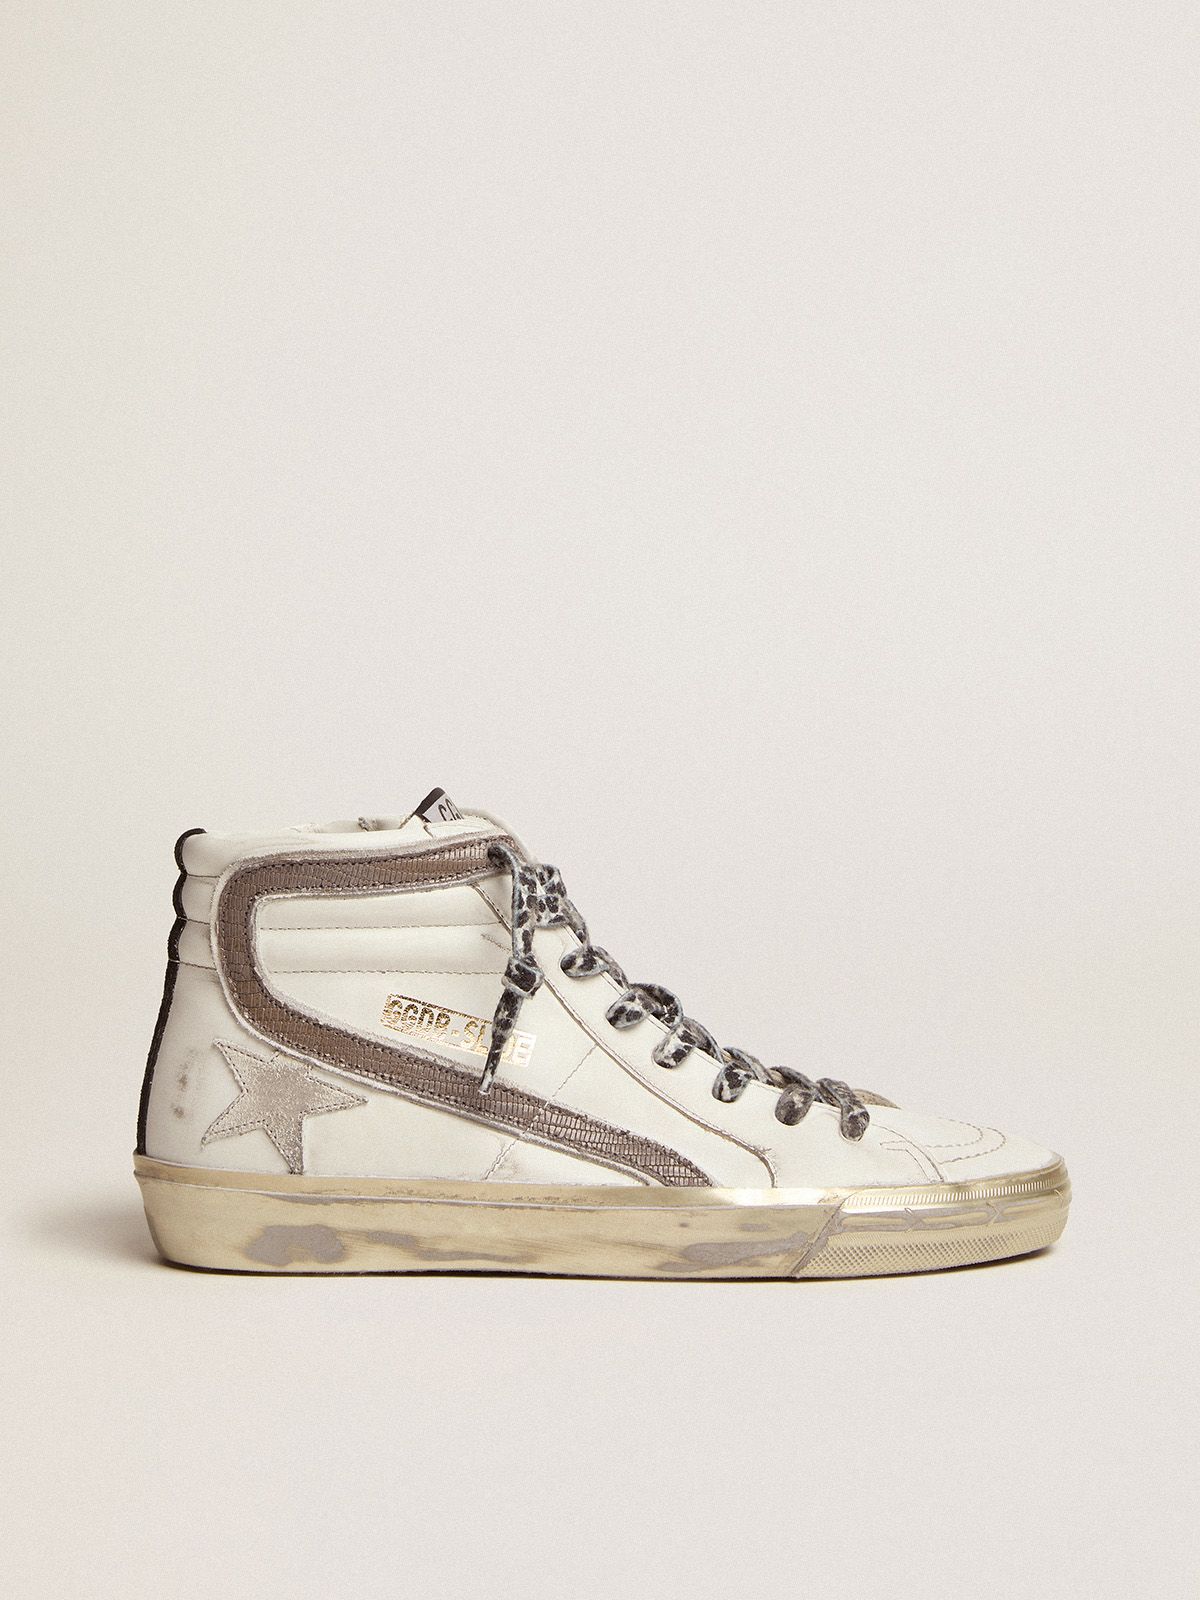 golden goose with and dove-gray star flash leather white sneakers suede Slide lizard-print